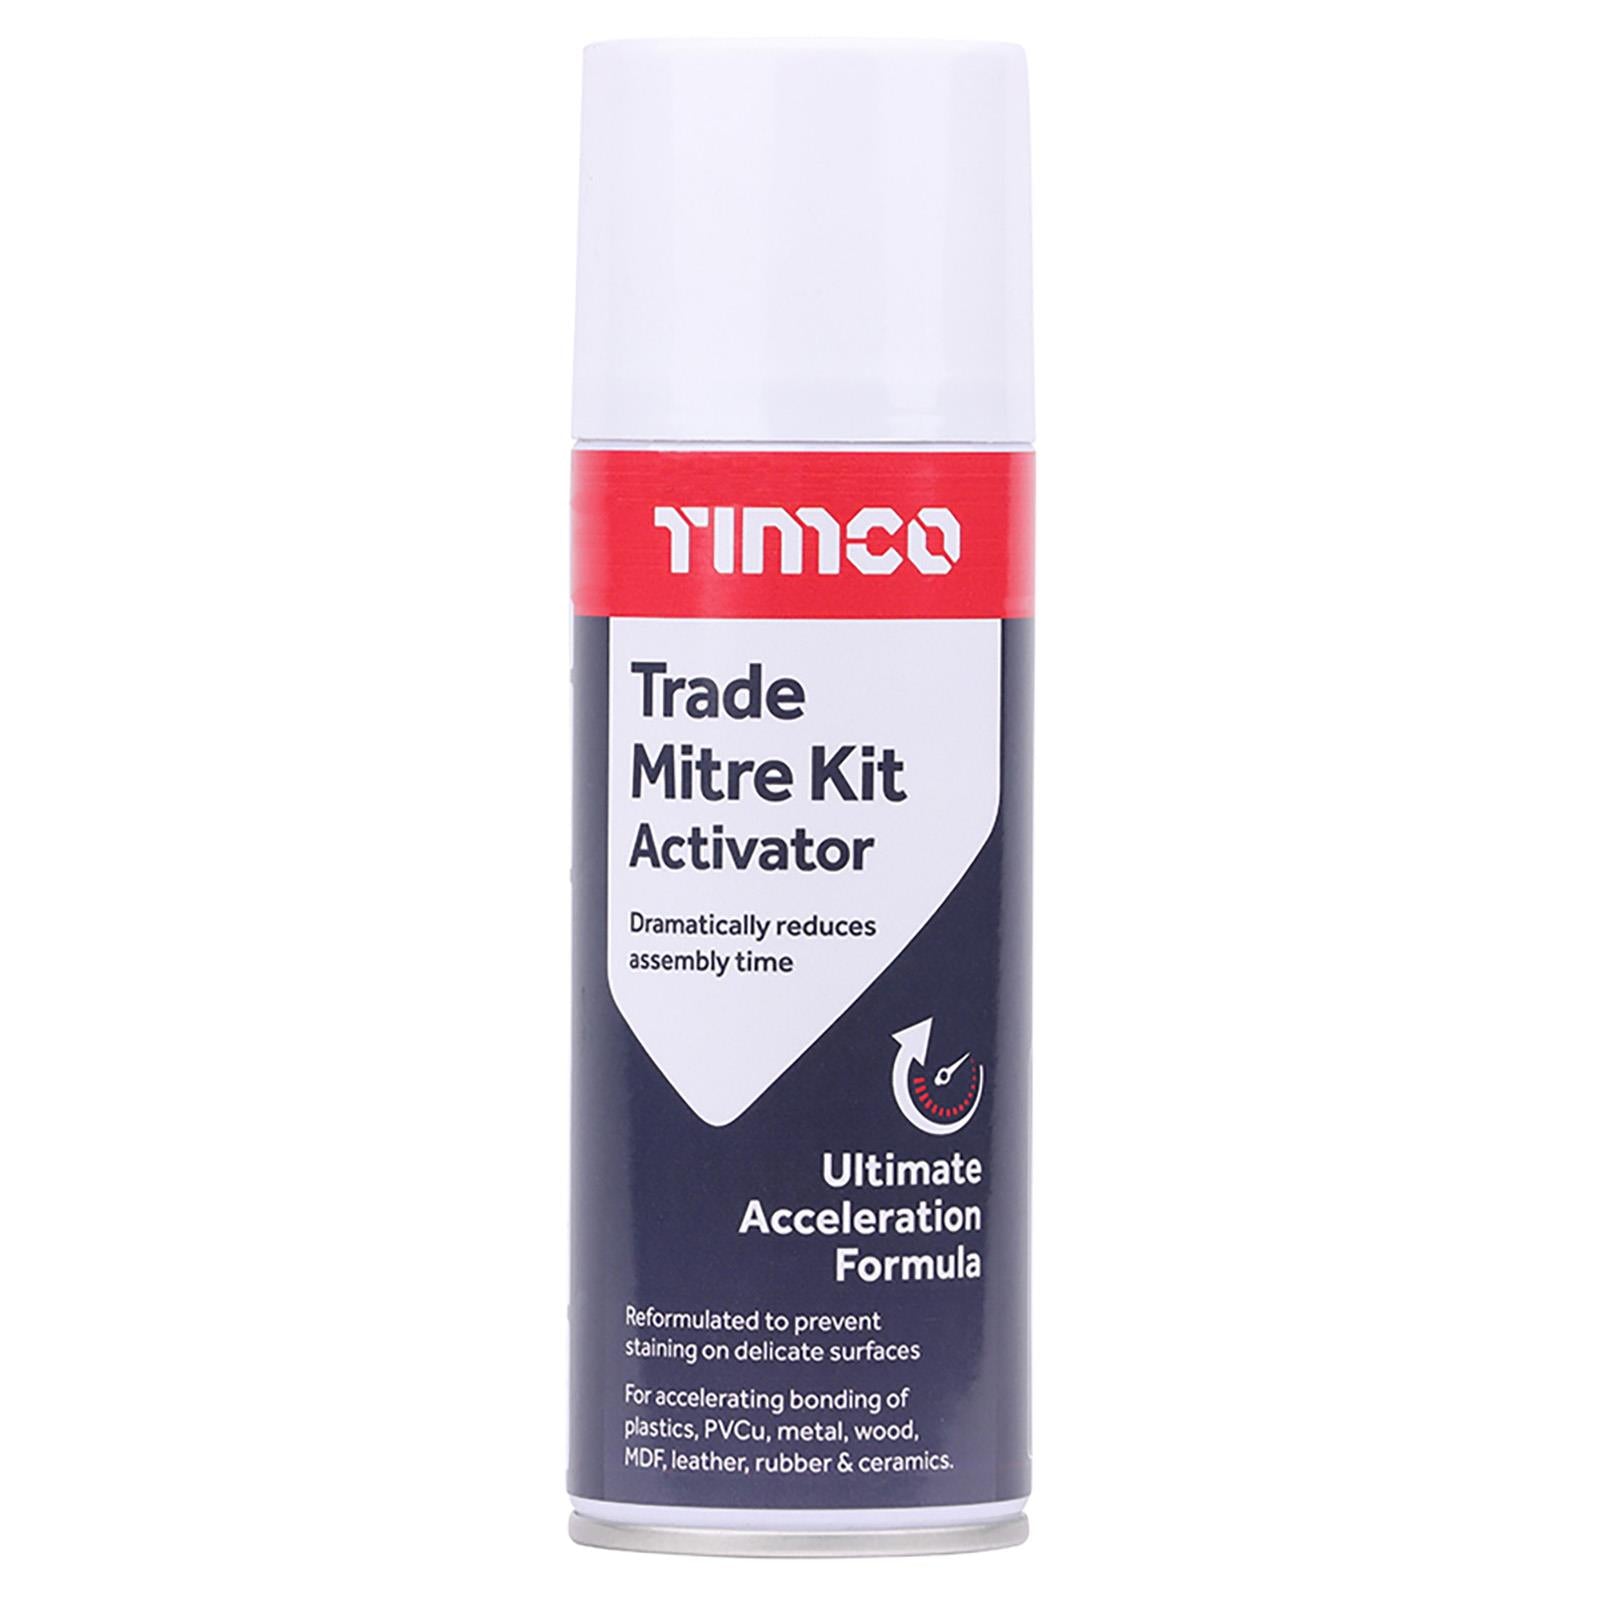 TIMCO Trade Mitre Kit Instant Bond 2 Part Glue and Activator 200ml / 50g Clear